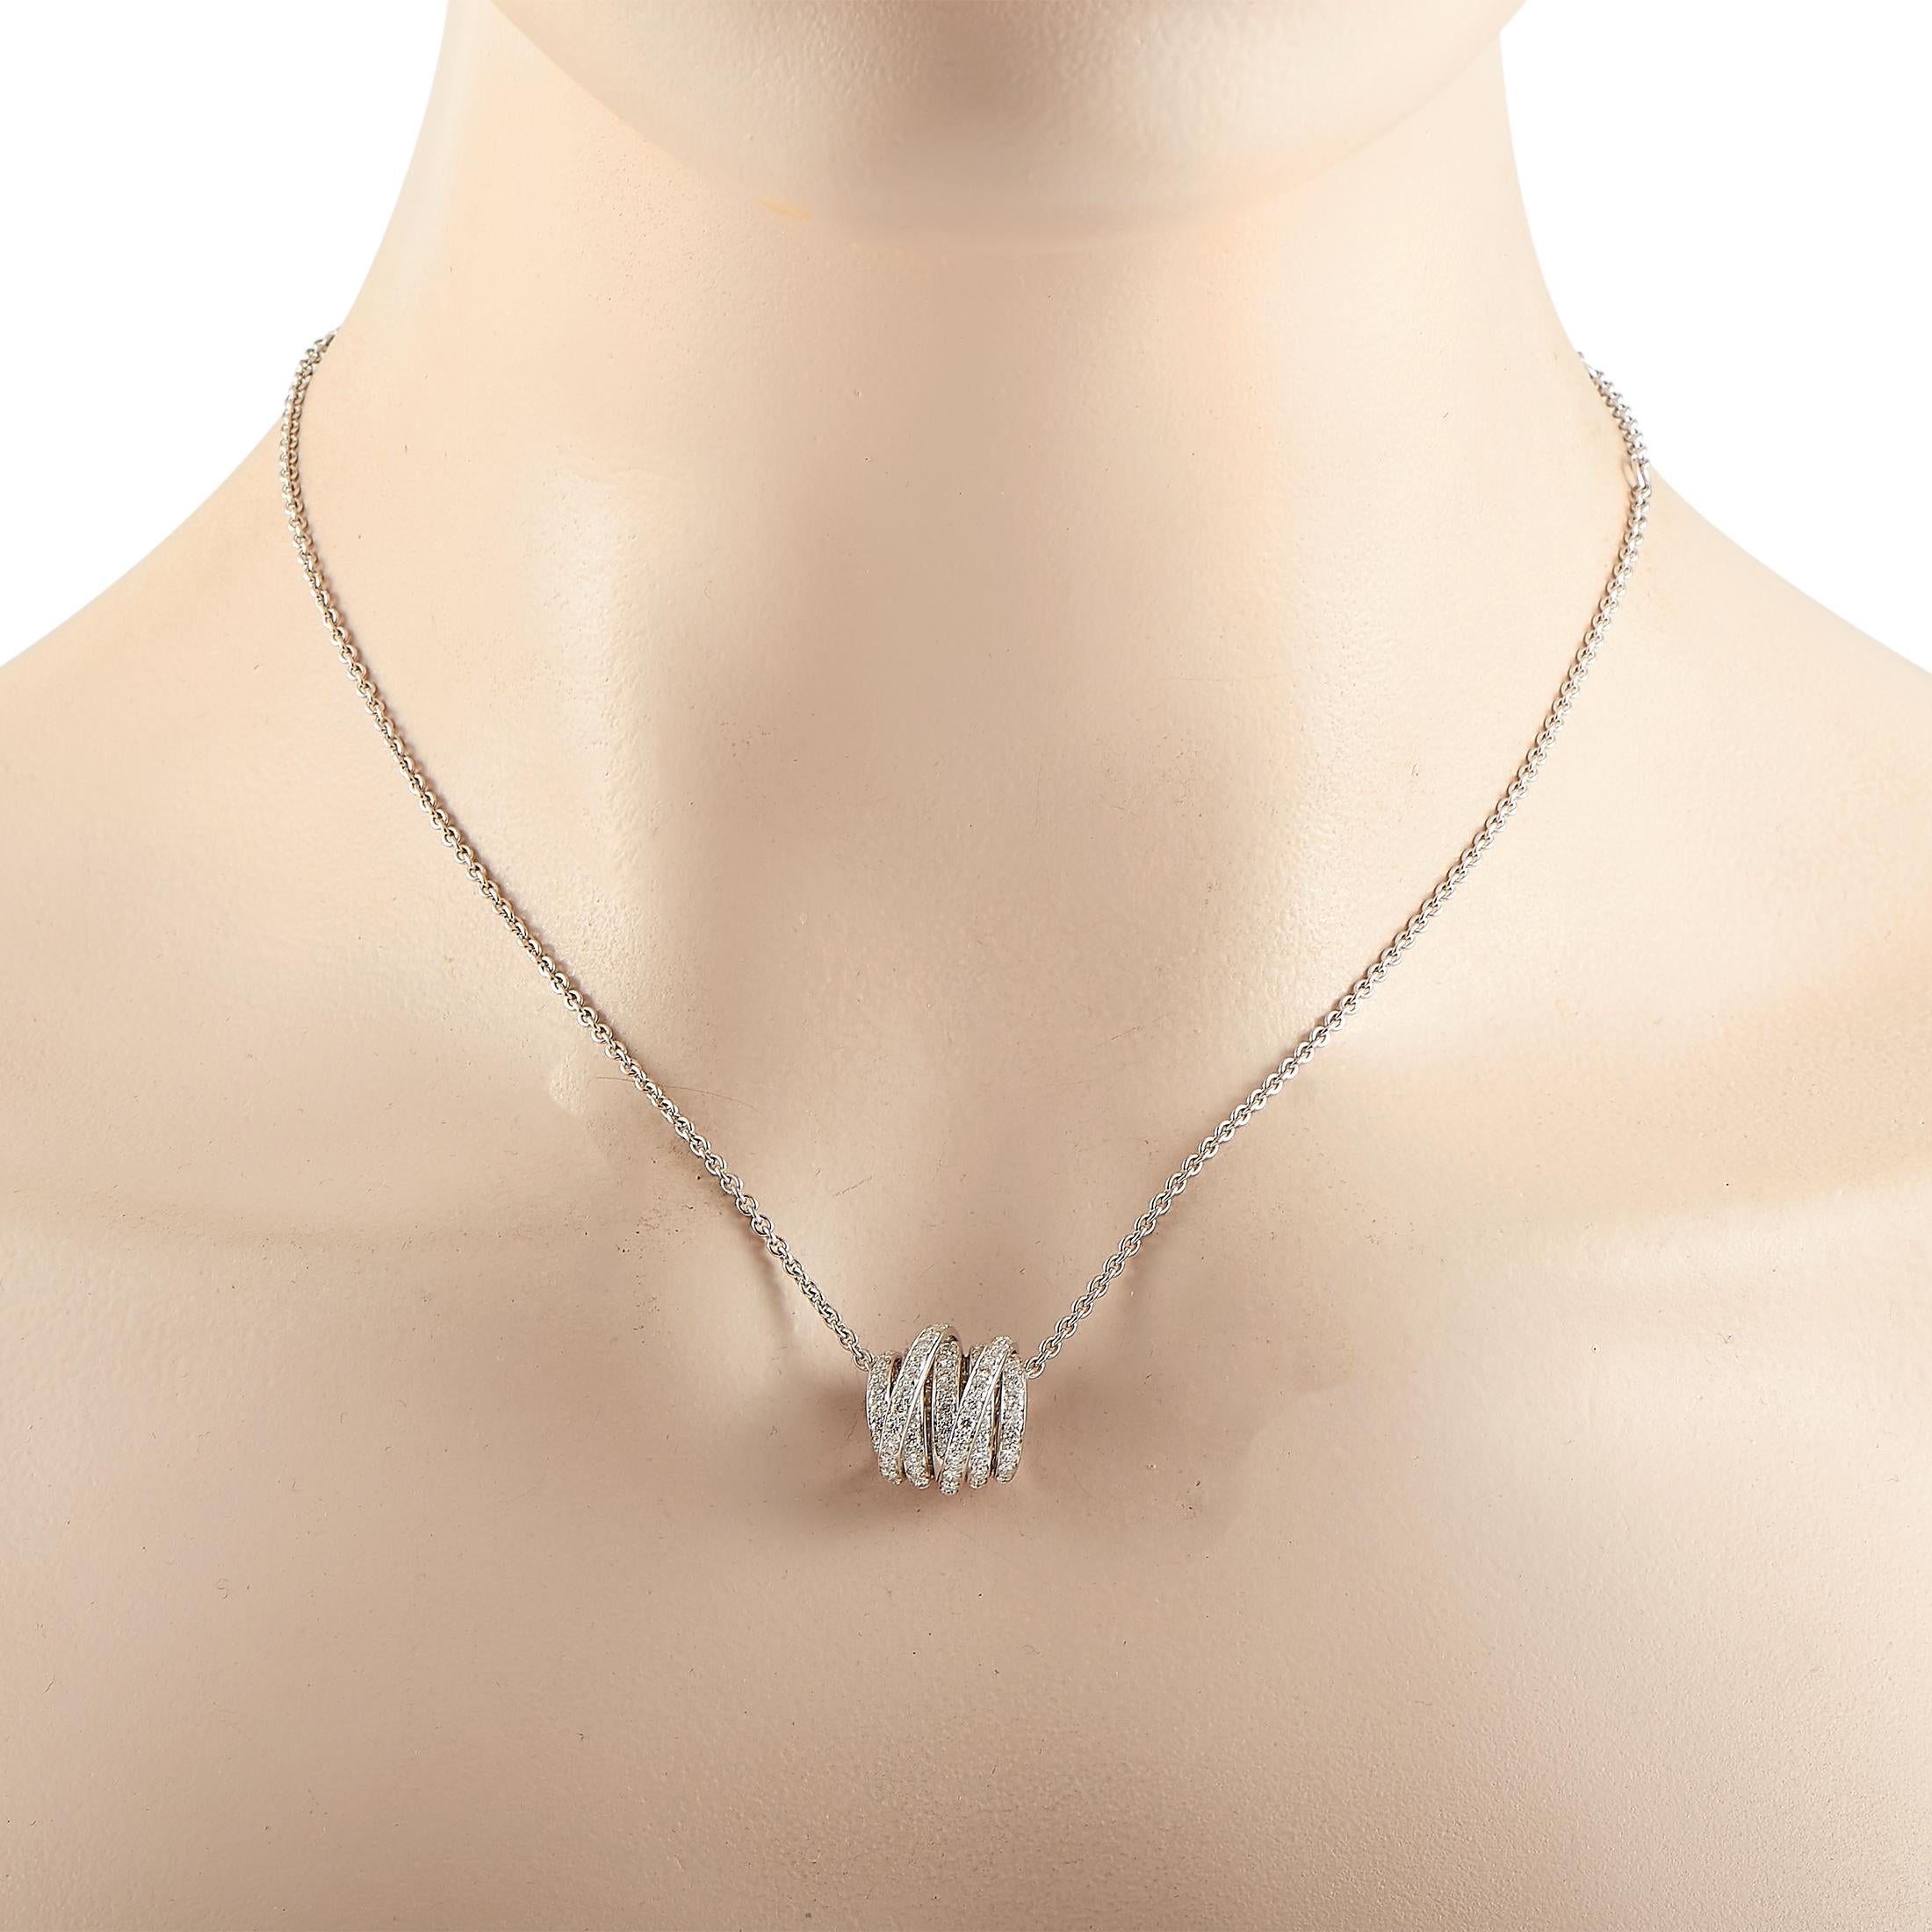 The de Grisogono “Allegra” necklace is made of 18K white gold and embellished with 79 white diamonds that amount to 1.10 carats. The necklace weighs 11.1 grams and boasts a 17” chain and a pendant that measures 0.55” in length and 0.55” in width.
 
